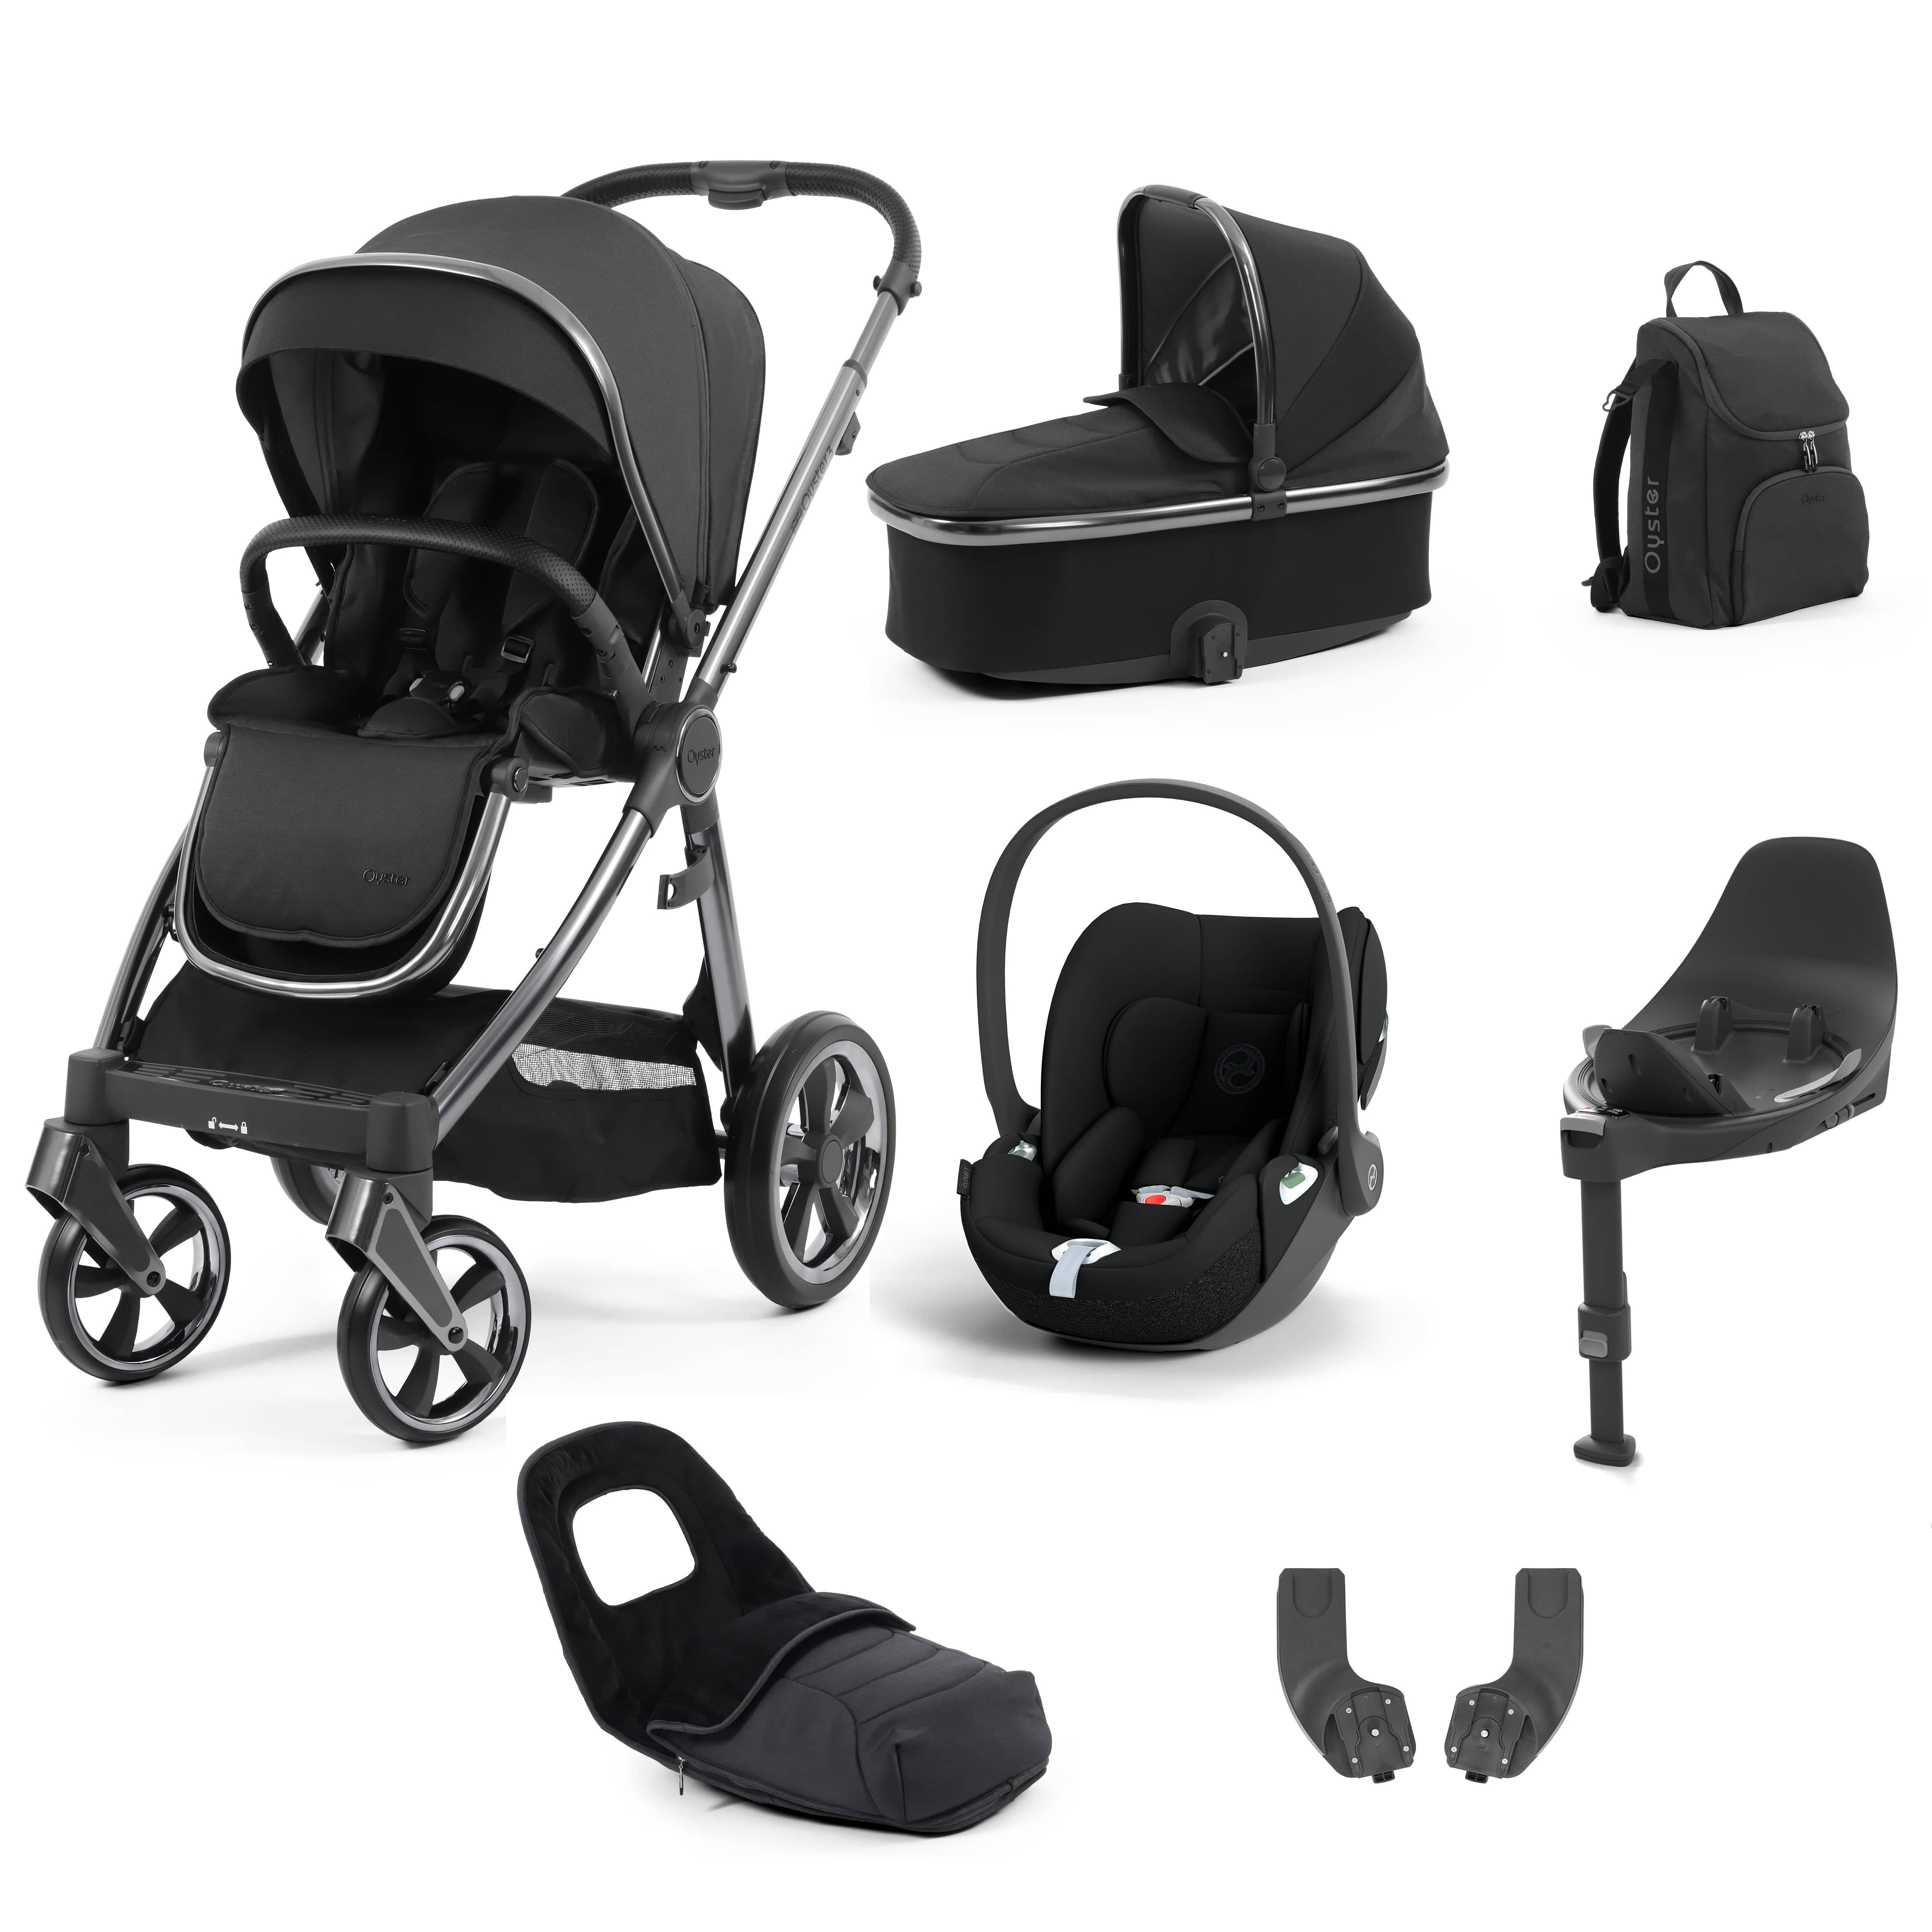 Babystyle Oyster 3 Luxury 7 Piece with Car Seat Bundle in Carbonite Travel Systems 14798-CRB 5060711567242